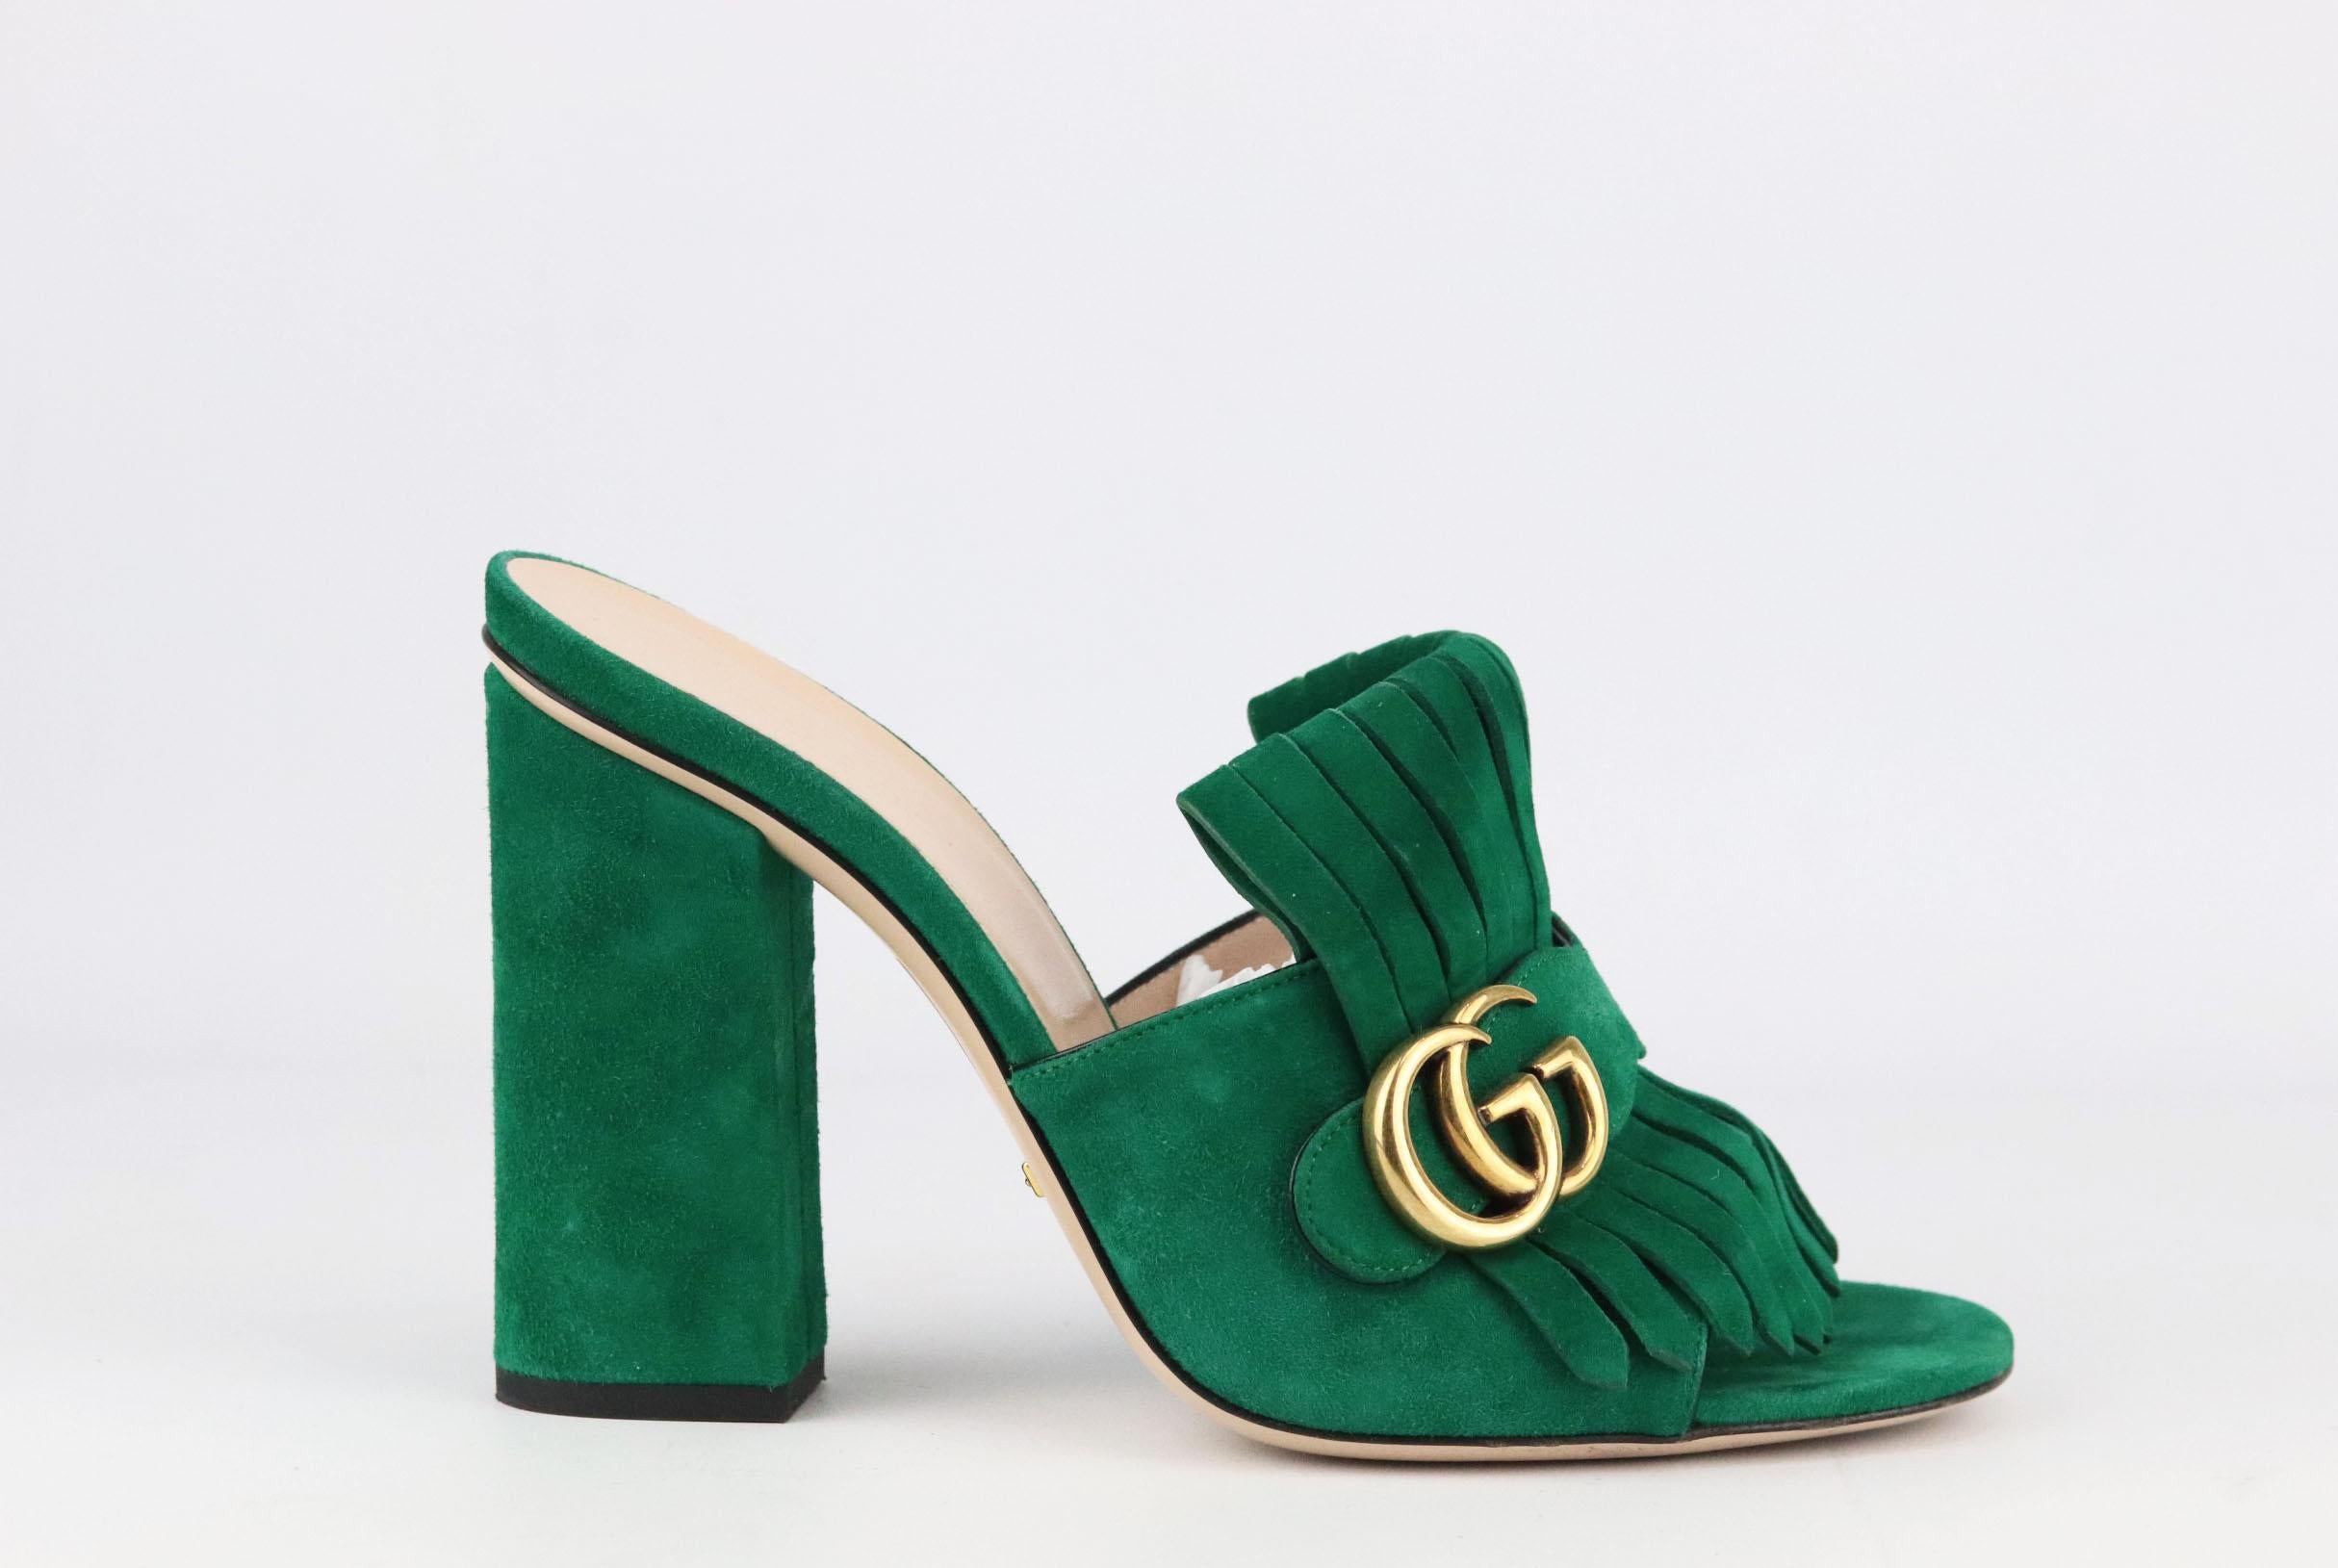 Gucci's 'Marmont' shoes are coveted by fashion influencers, editors and celebrities alike, made in Italy from smooth green suede, these mules are detailed with heritage kiltie fringing and the house's iconic burnished 'GG' plaque. 
Soles measures